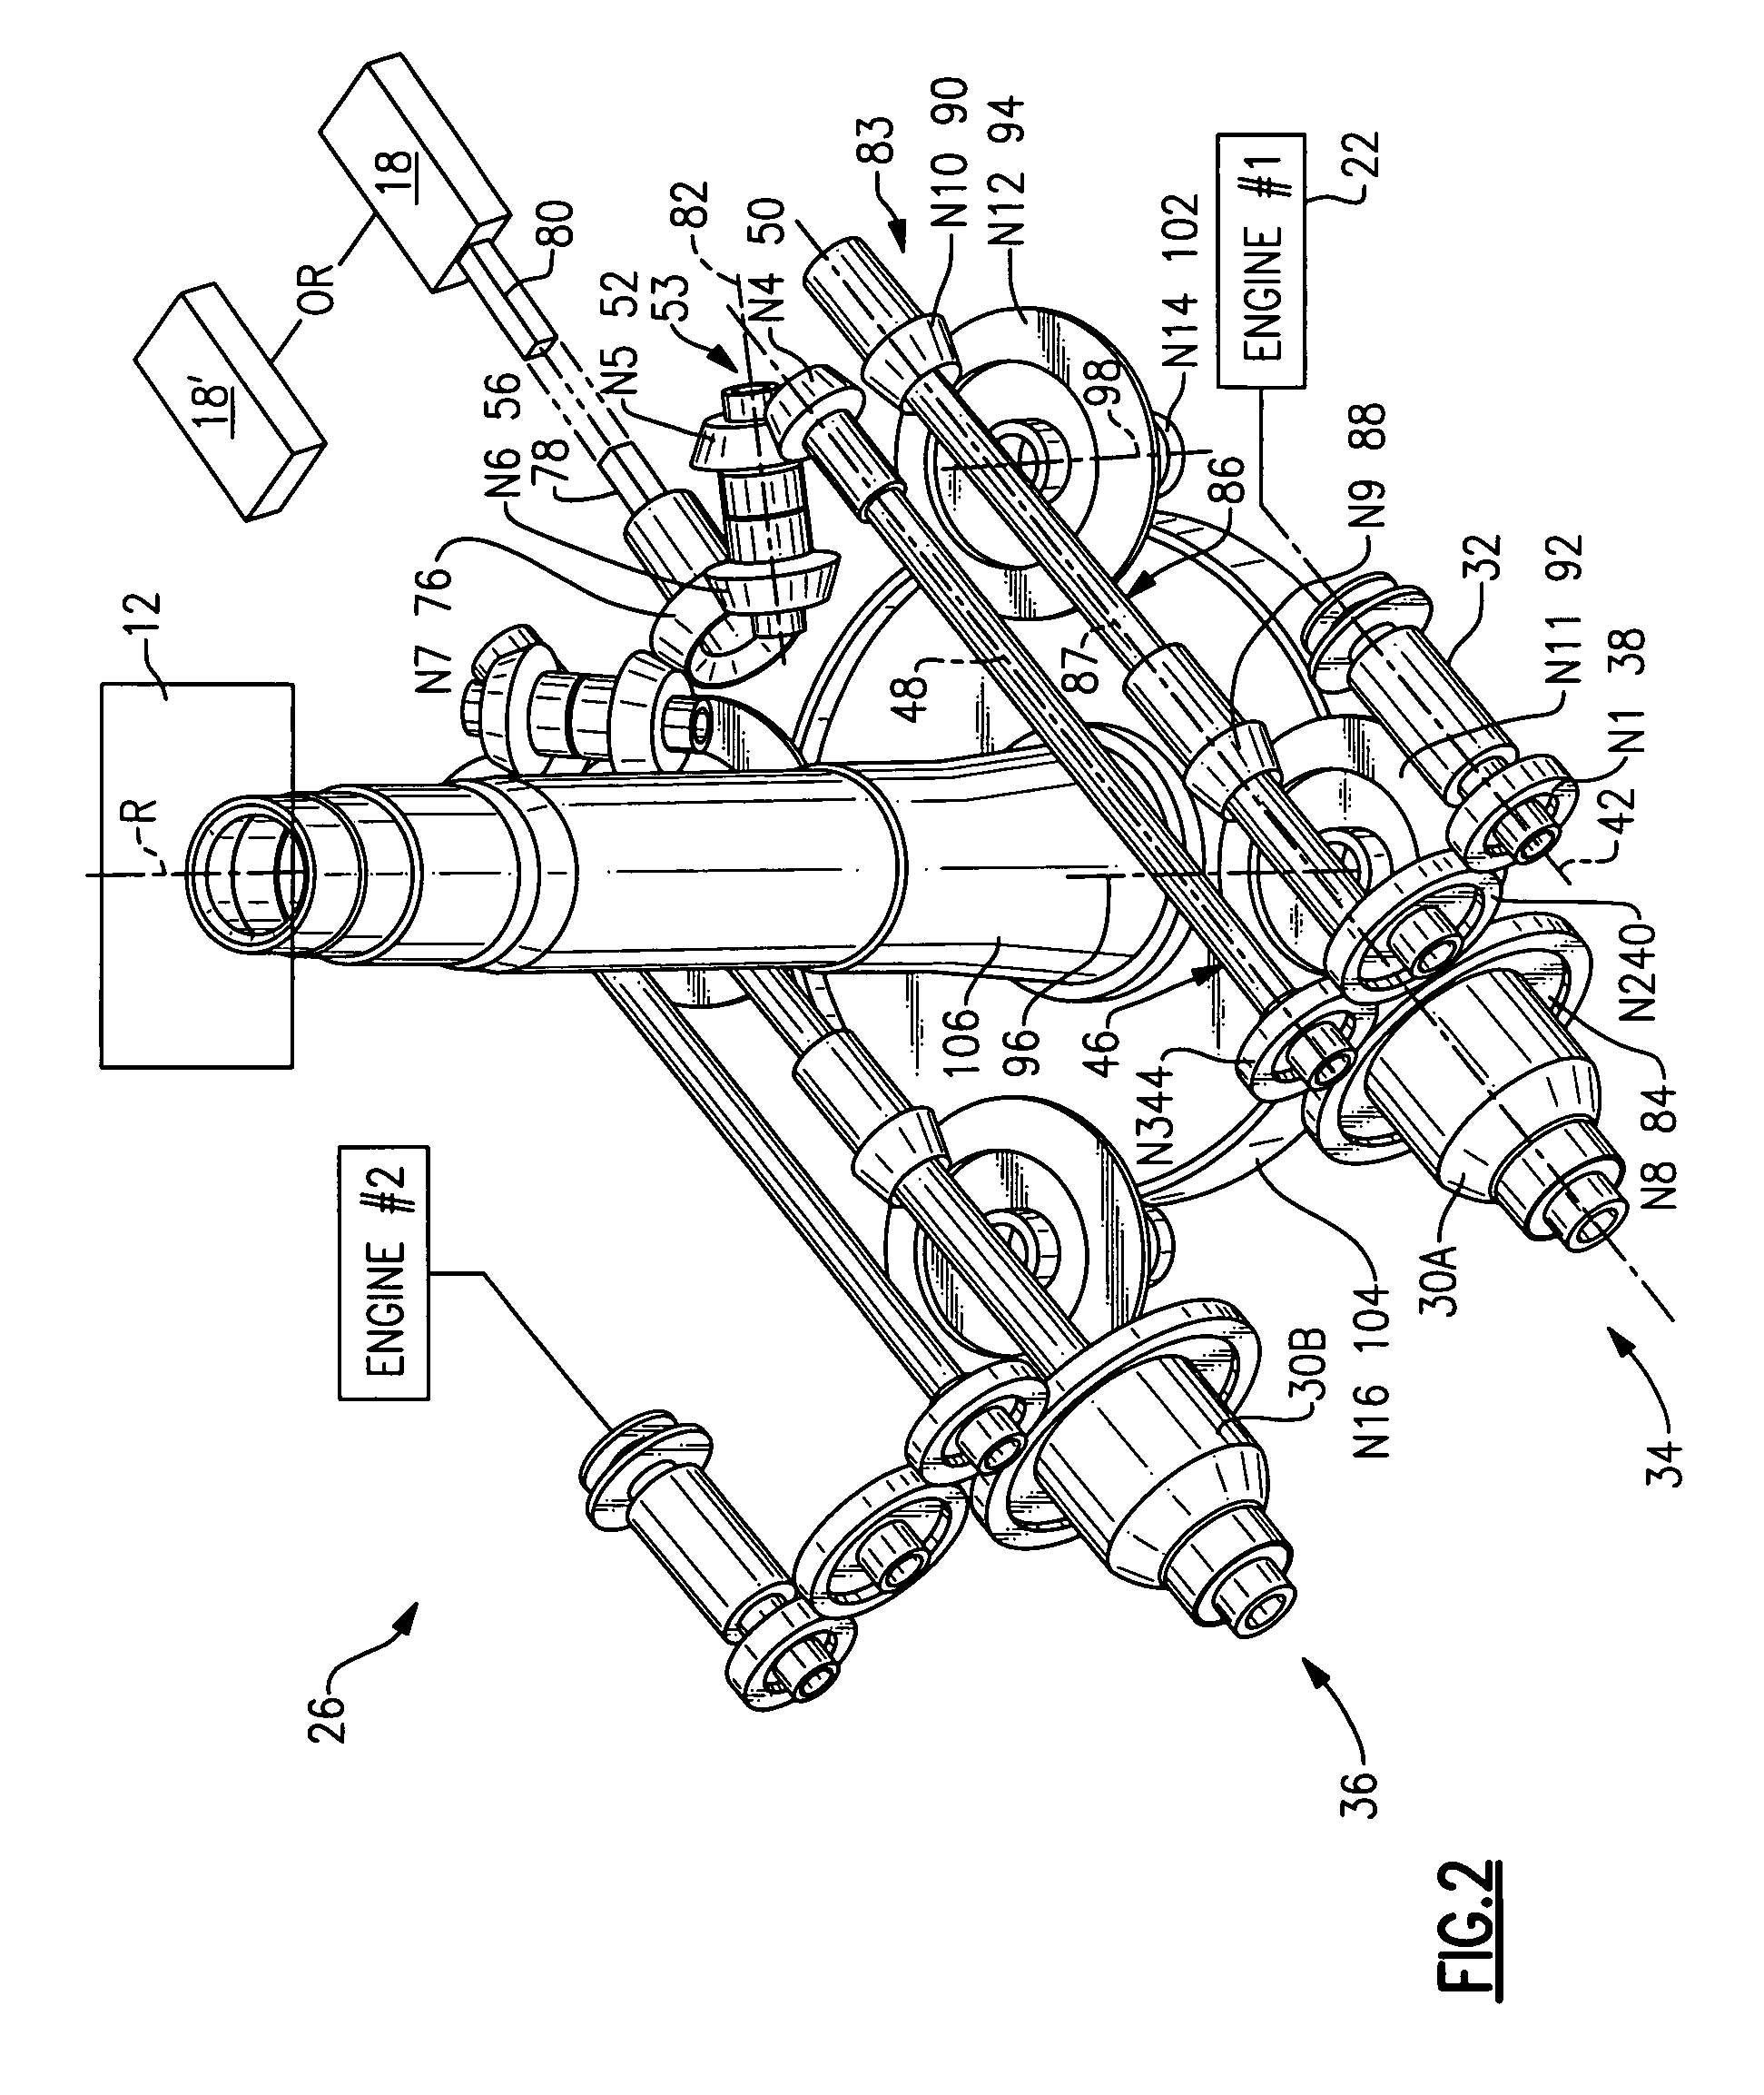 Variable speed gearbox with an independently variable speed tail rotor system for a rotary wing aircraft